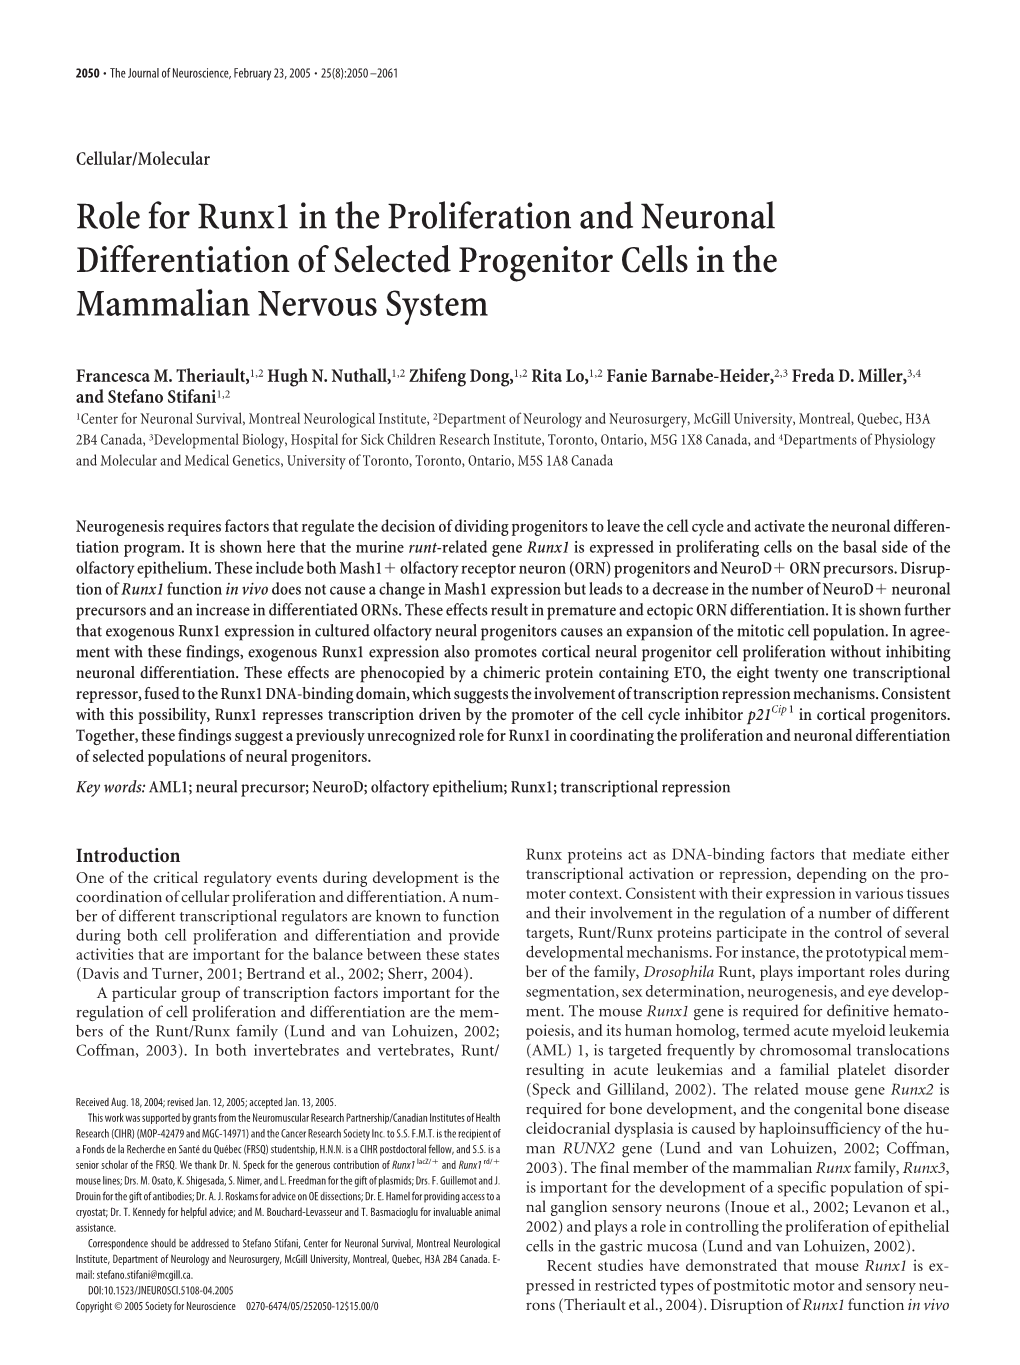 Role for Runx1 in the Proliferation and Neuronal Differentiation of Selected Progenitor Cells in the Mammalian Nervous System